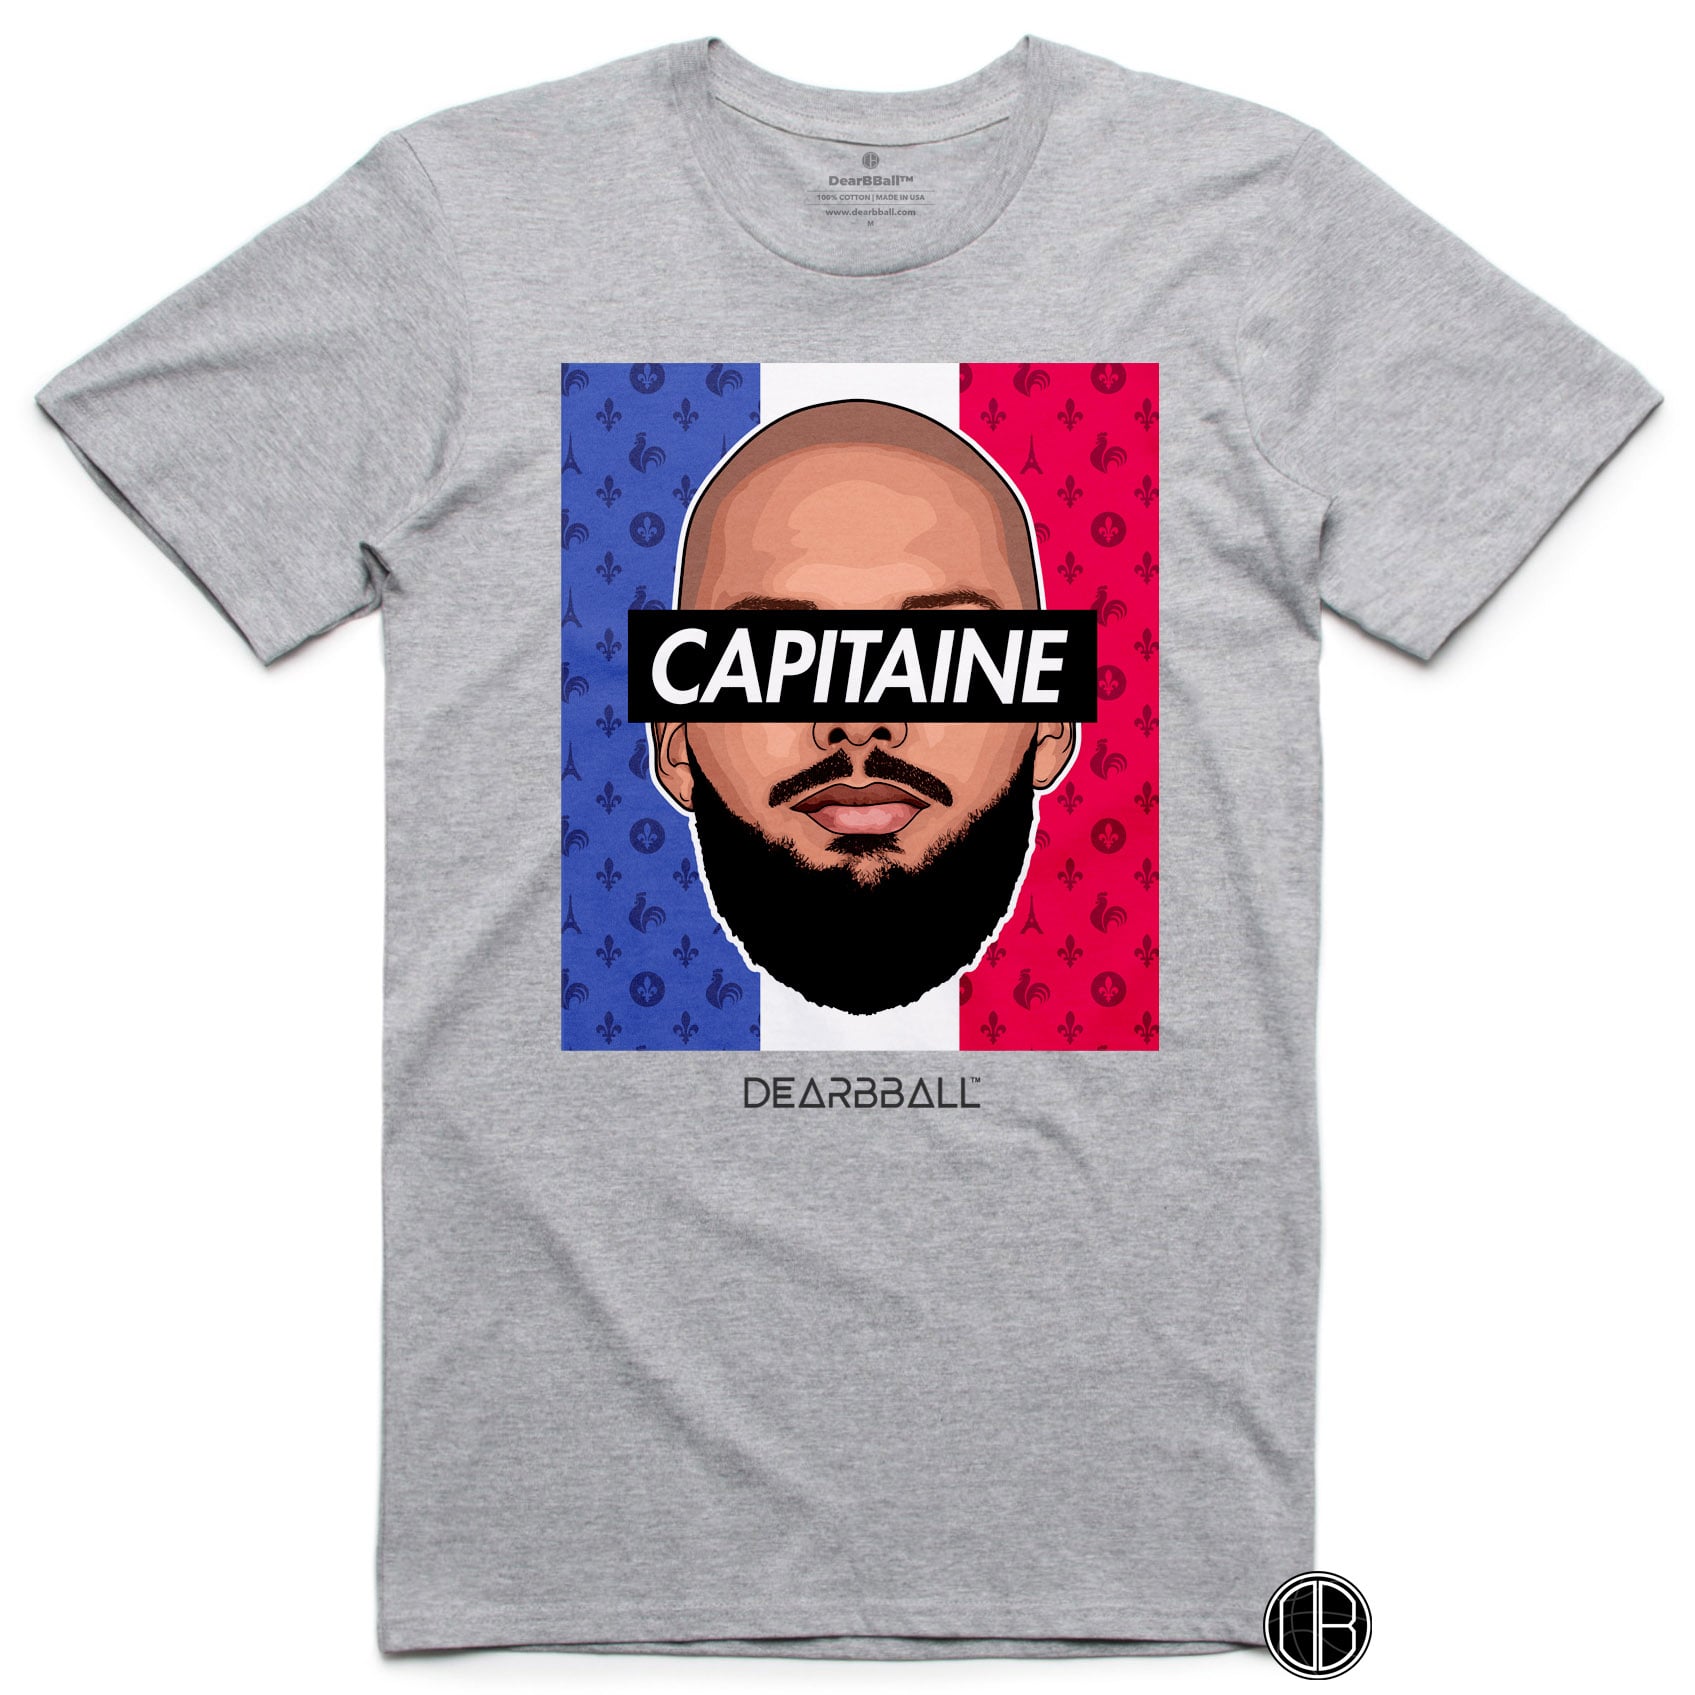 DearBBall T-Shirt - CAPITAINE Emblemes France Edition